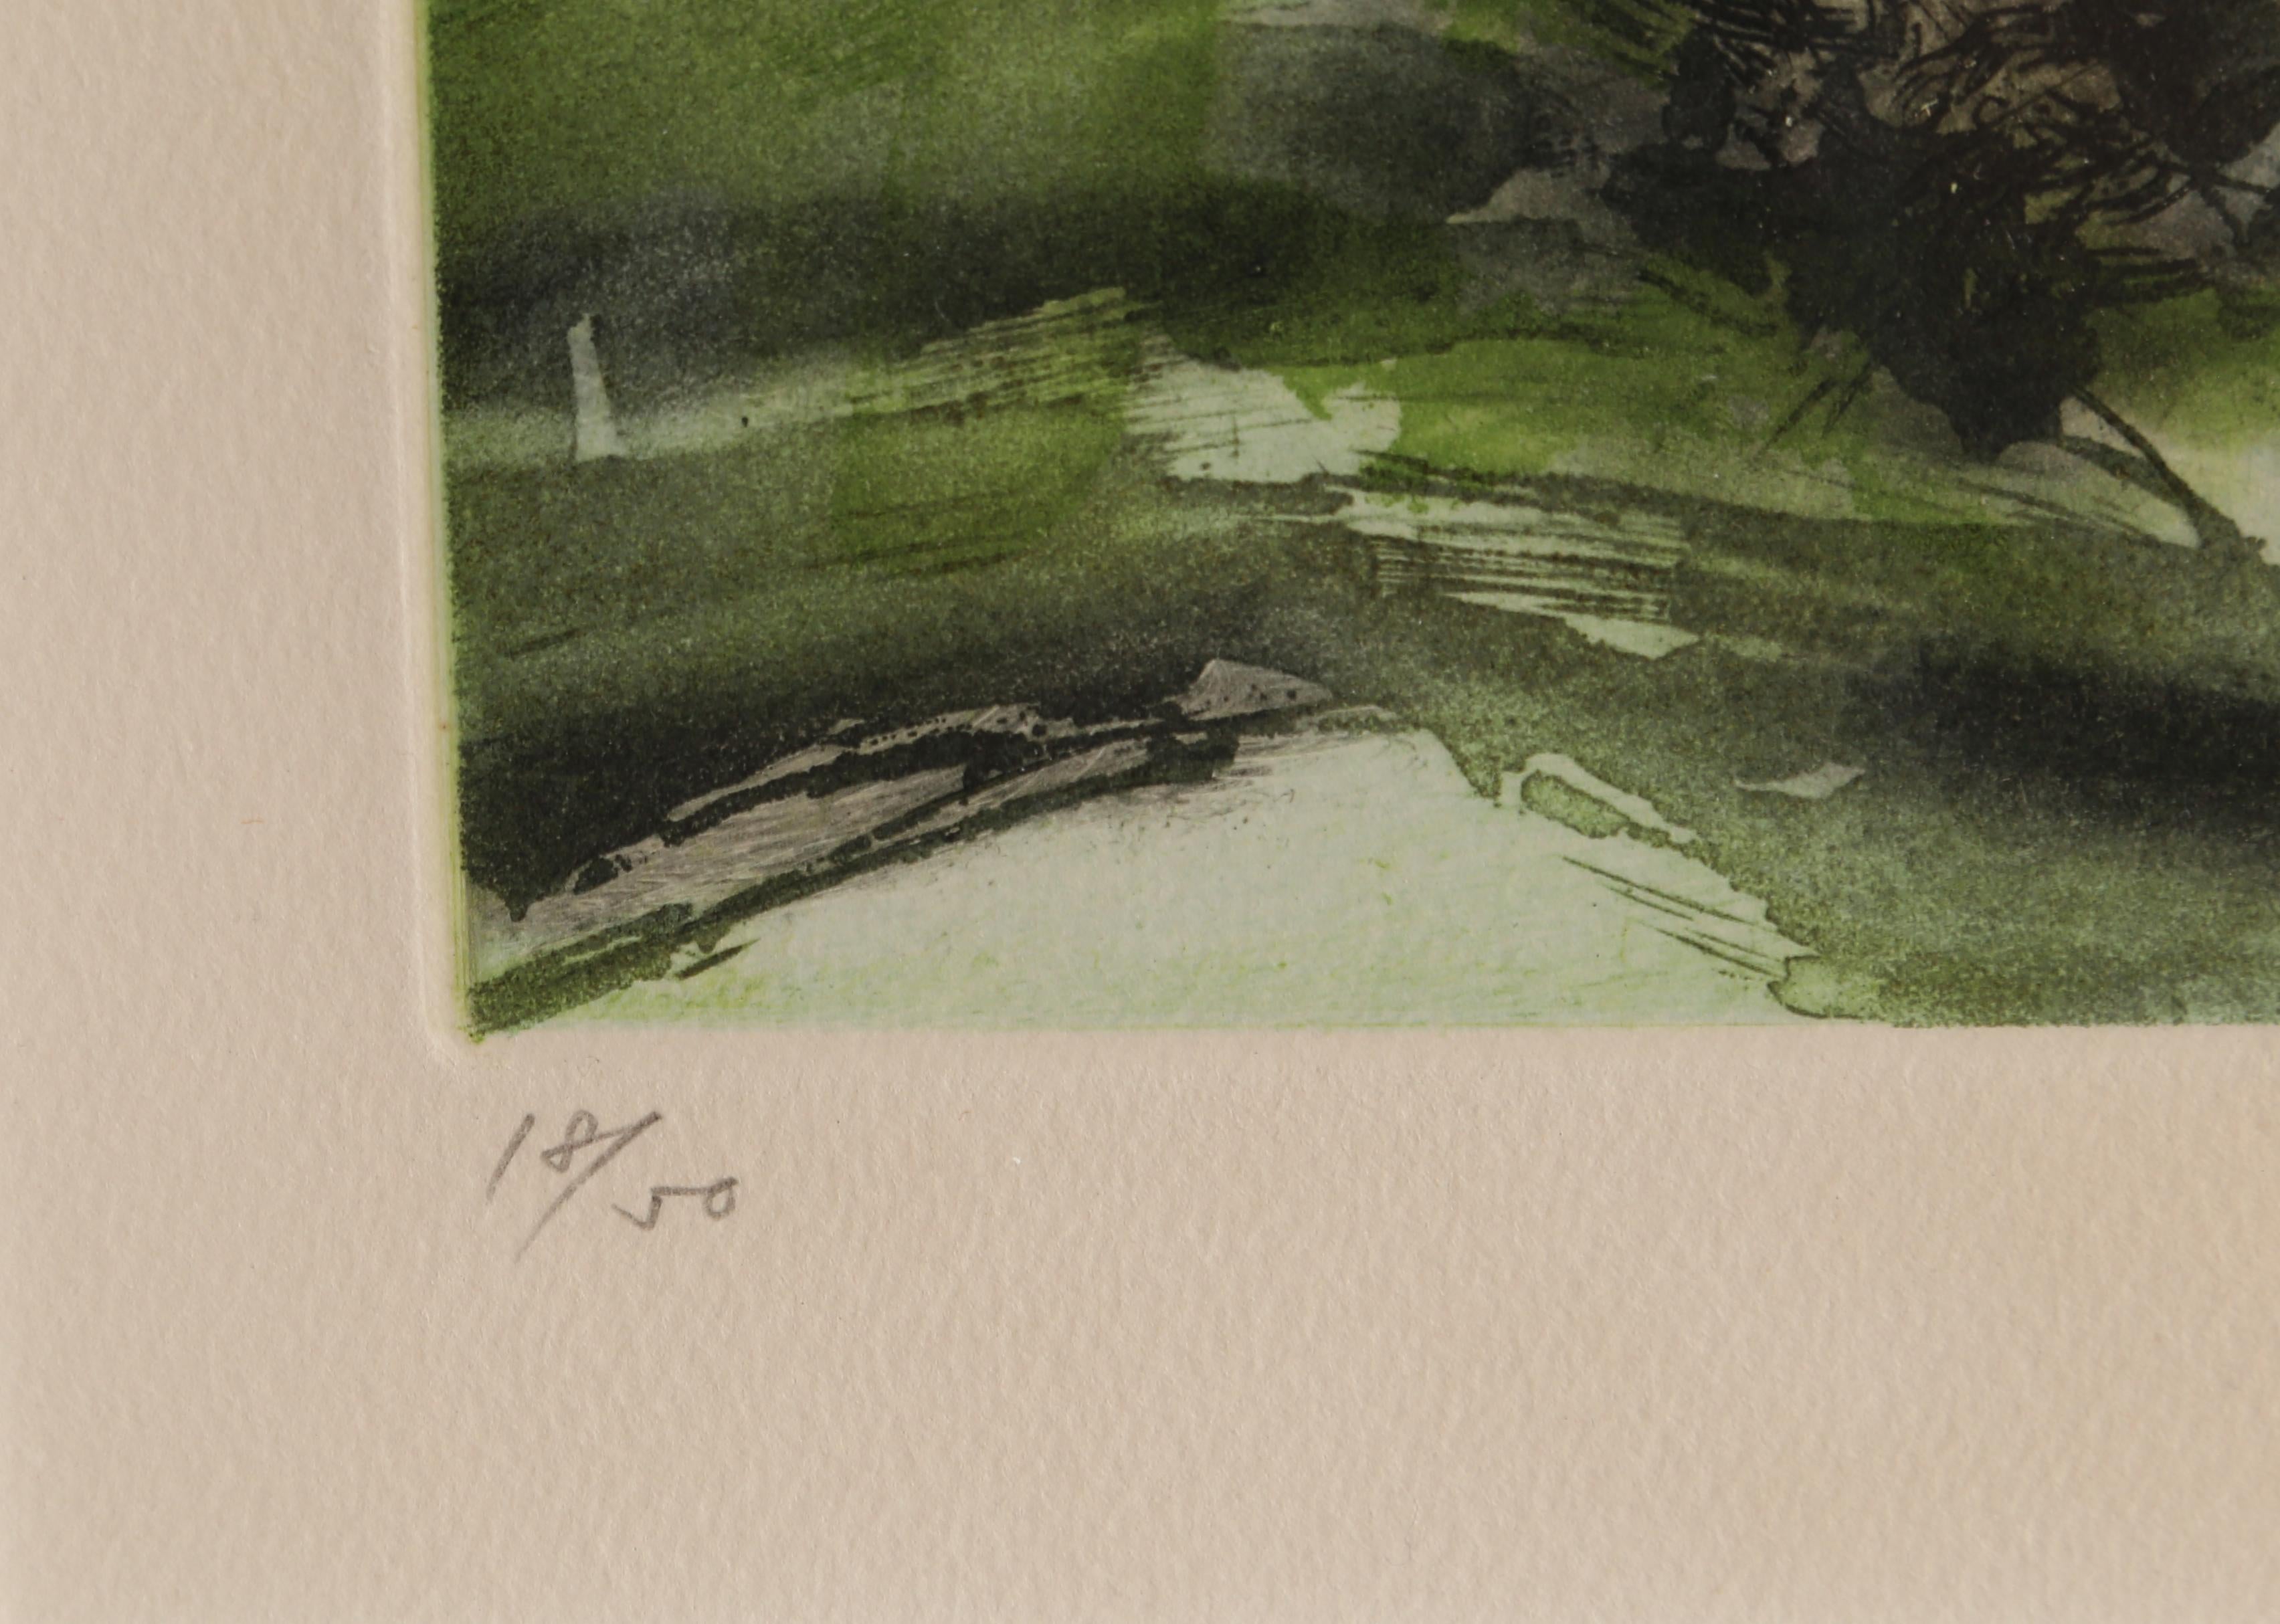 Artist: Zao Wou-Ki, Chinese/French (1921 - 2013)
Title: Untitled 265
Year: 1975
Medium: Aquatint Etching, Signed and numbered in pencil
Edition: 18/50
Image Size: 11.5 x 9 inches
Size: 22 in. x 14.5 in. (55.88 cm x 36.83 cm)
Frame Size: 24.25 x 18